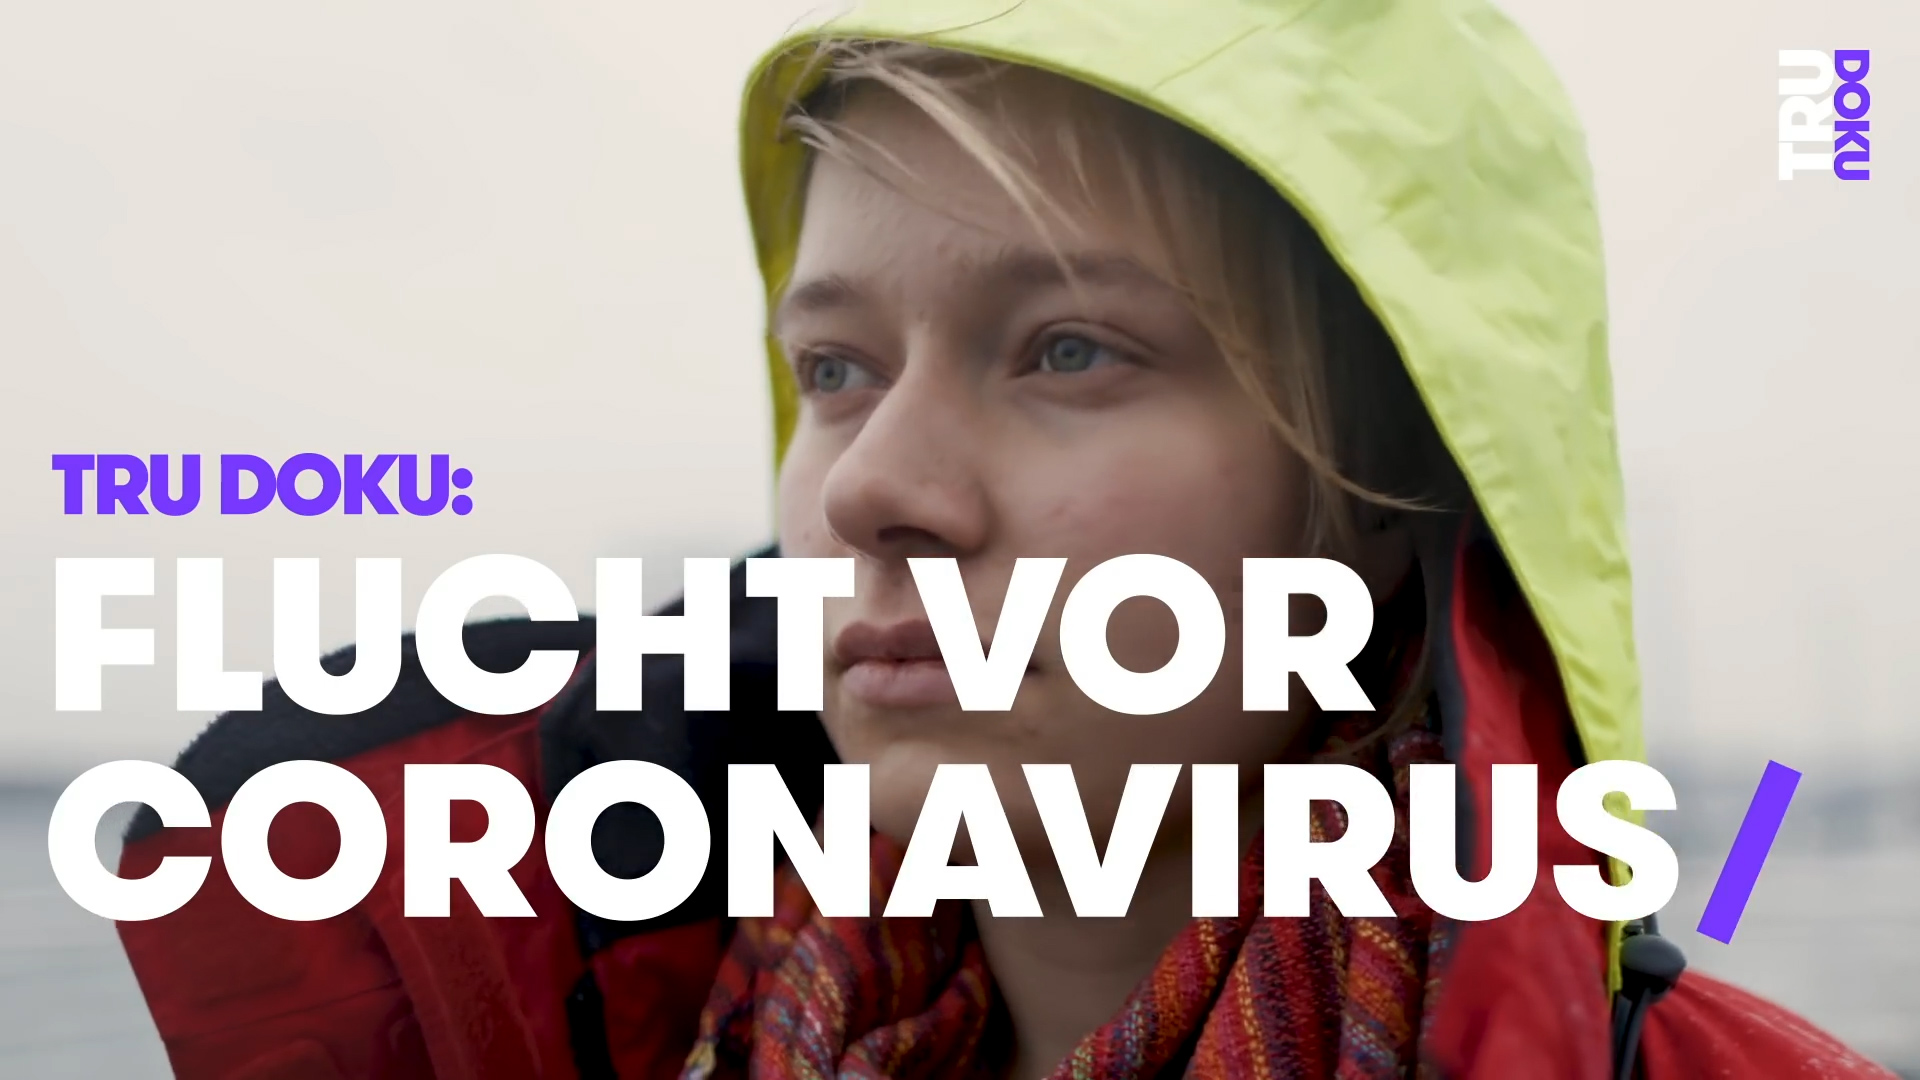 Franka and the title of the clip - flucht vor corona